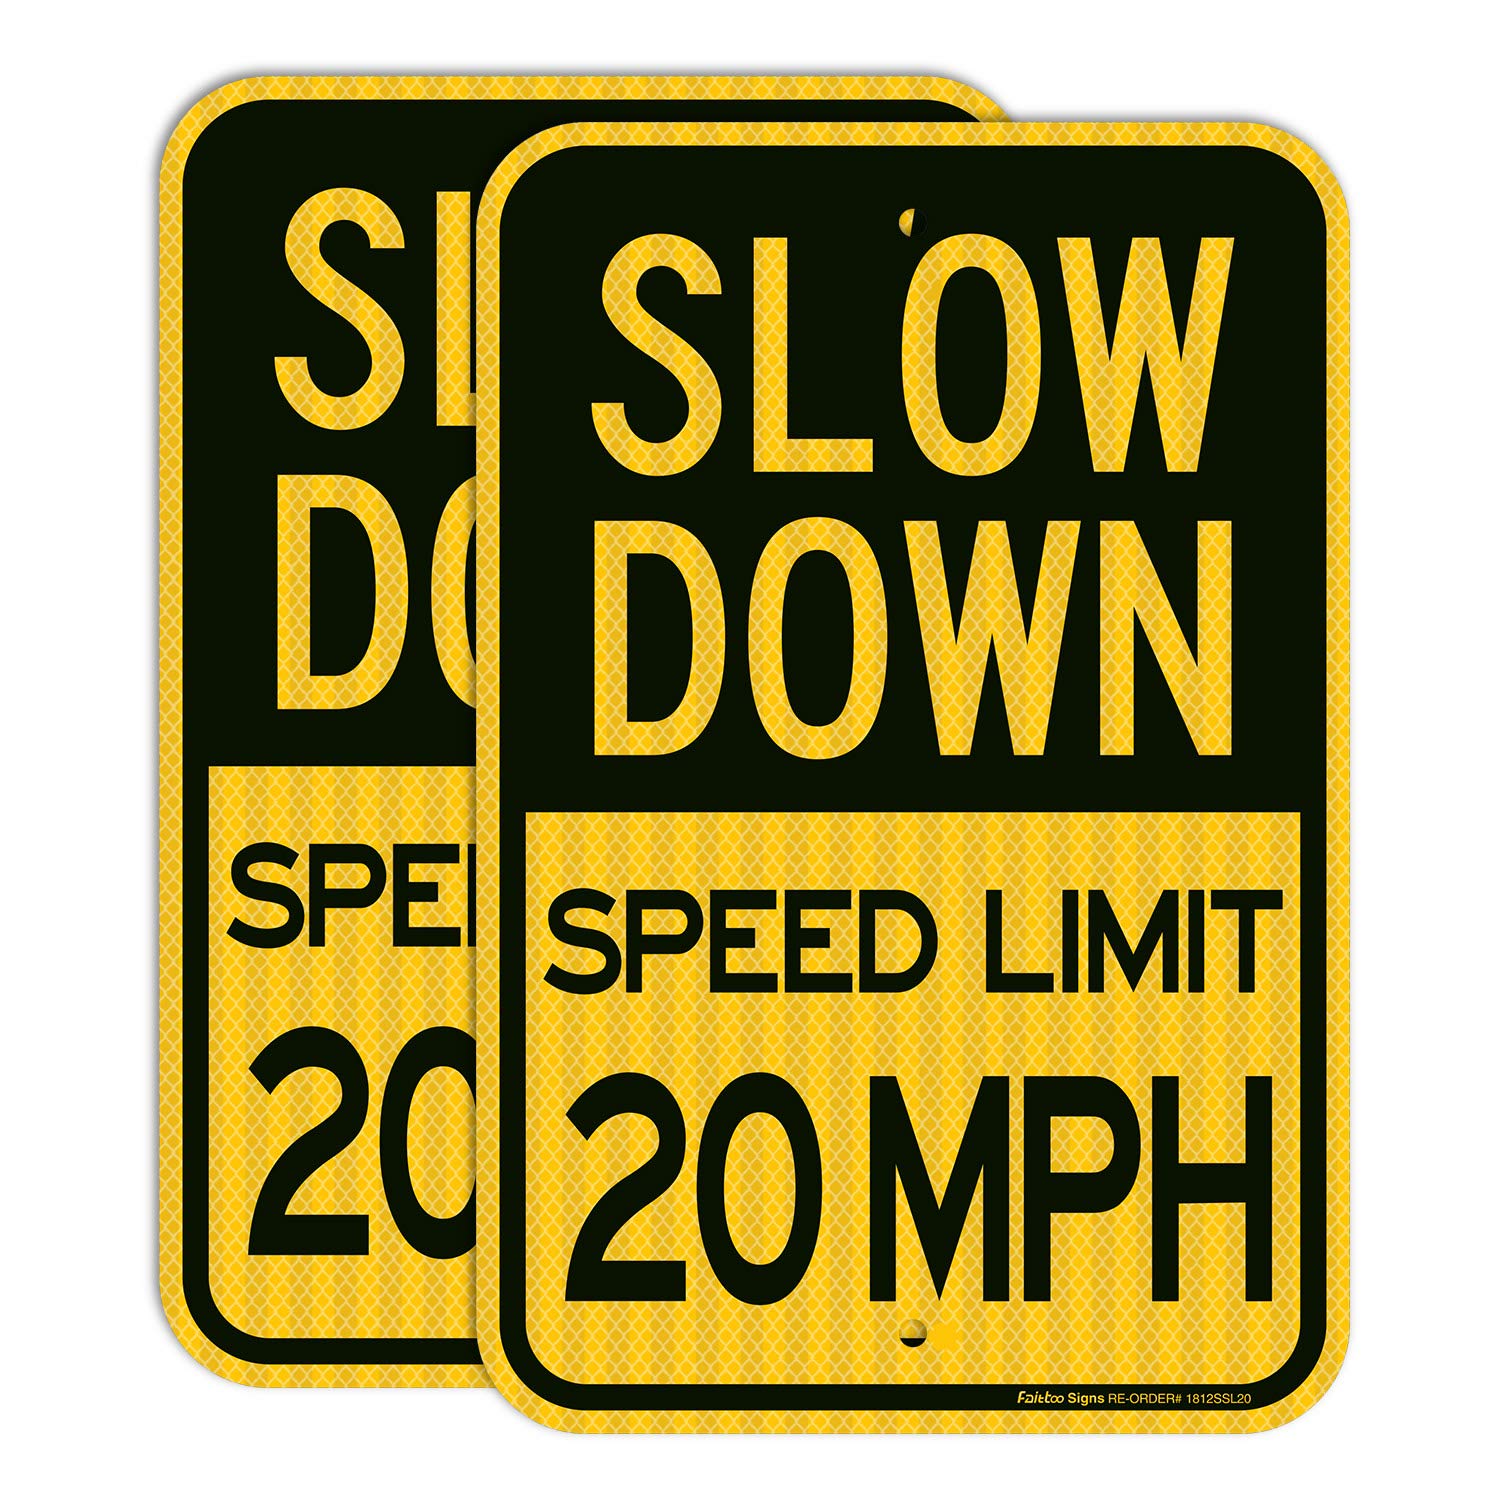 Slow Down Speed Limit 15 MPH Sign, Slow Down Sign, 18 x 12 Inches Engi